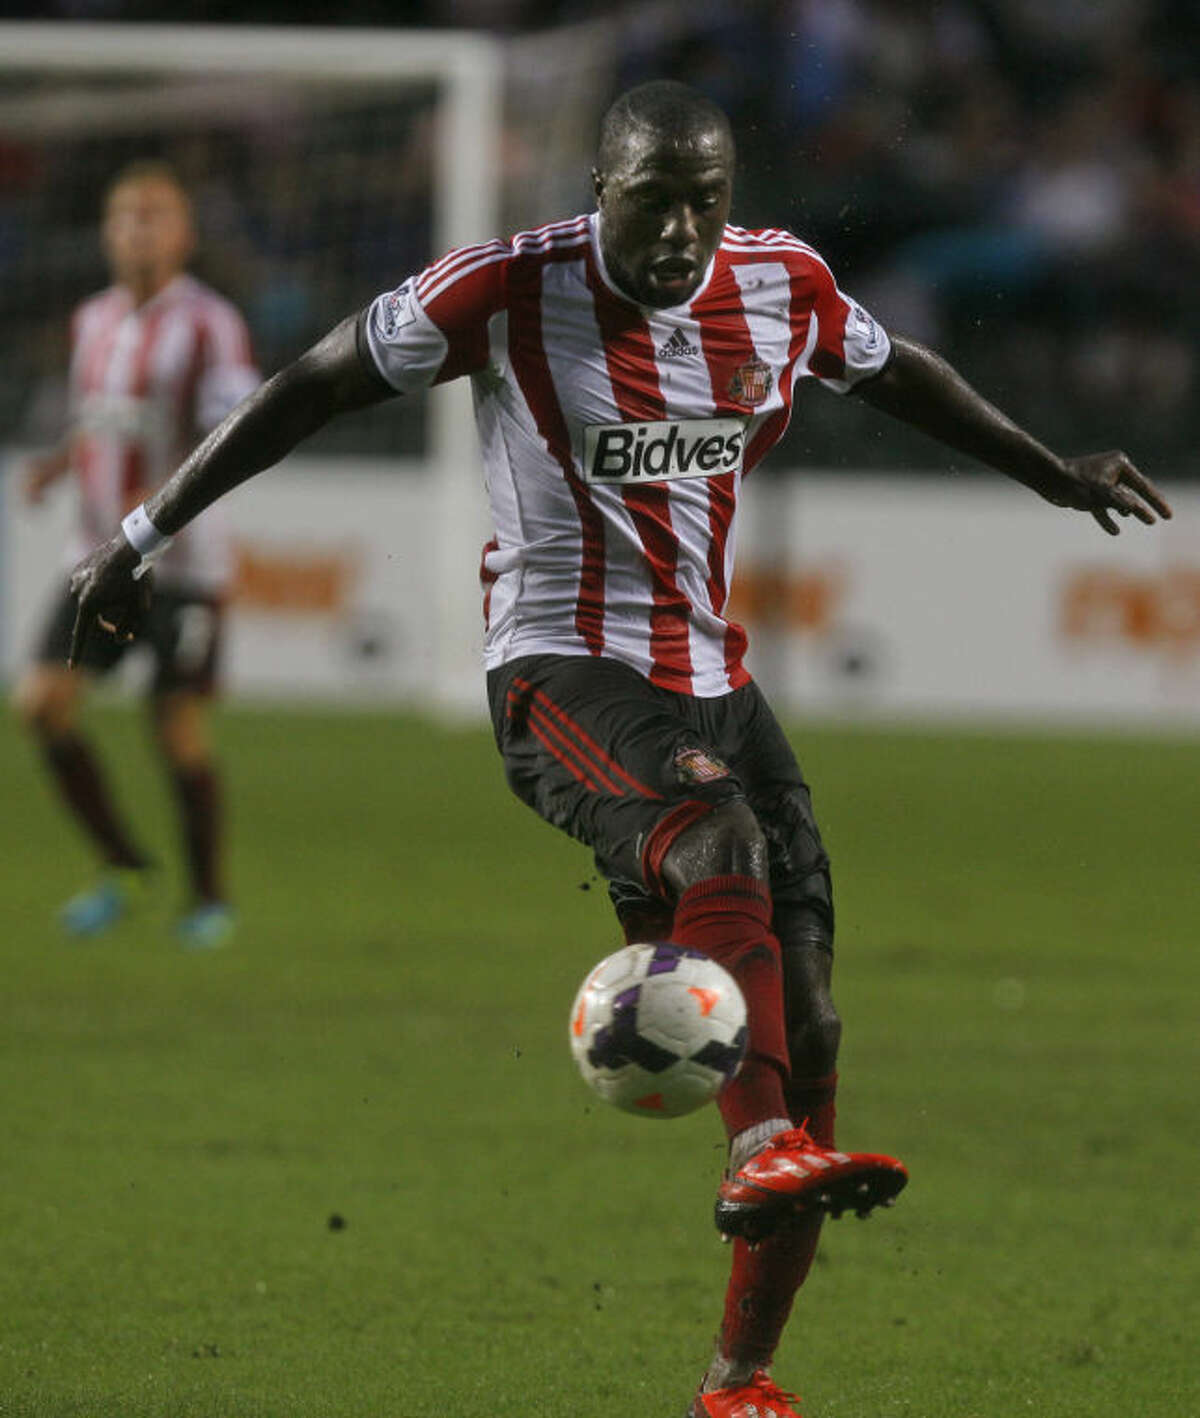 Jozy Altidore of Sunderland controls the ball during the match against Tottenham Hotspur at the Barclays Asia Trophy Wednesday, July 24, 2013. (AP Photo/Kin Cheung)